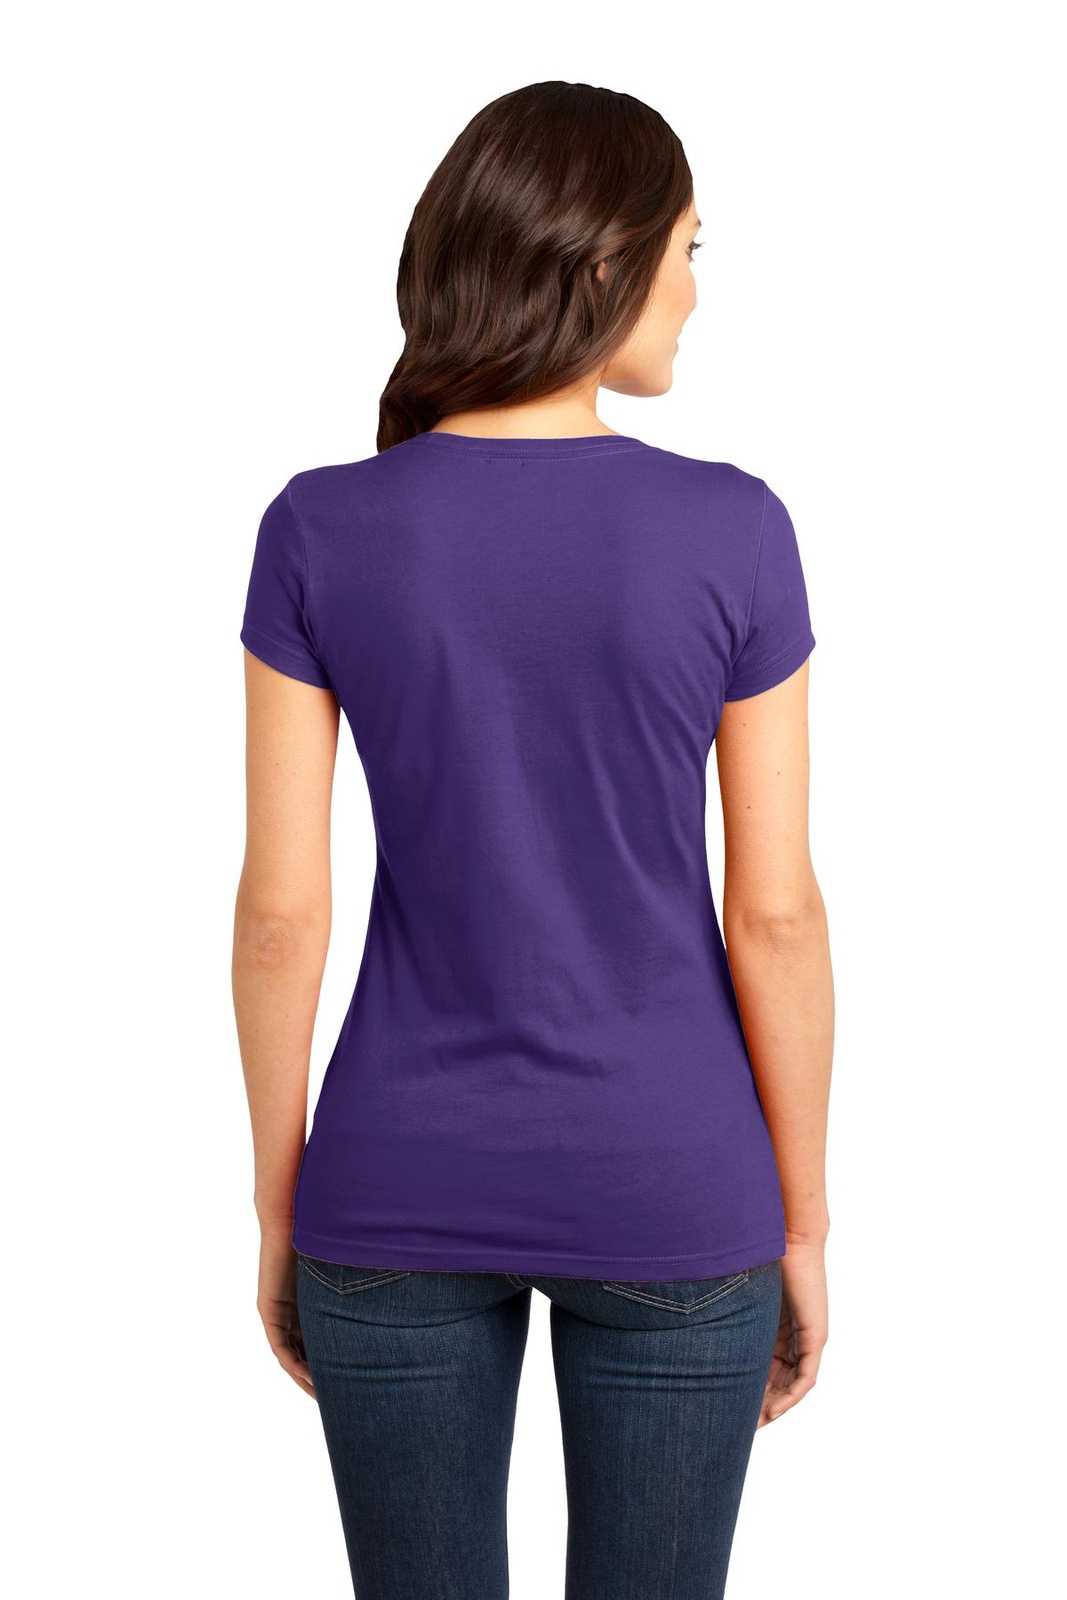 District DT6001 Women's Fitted Very Important Tee - Purple - HIT a Double - 1